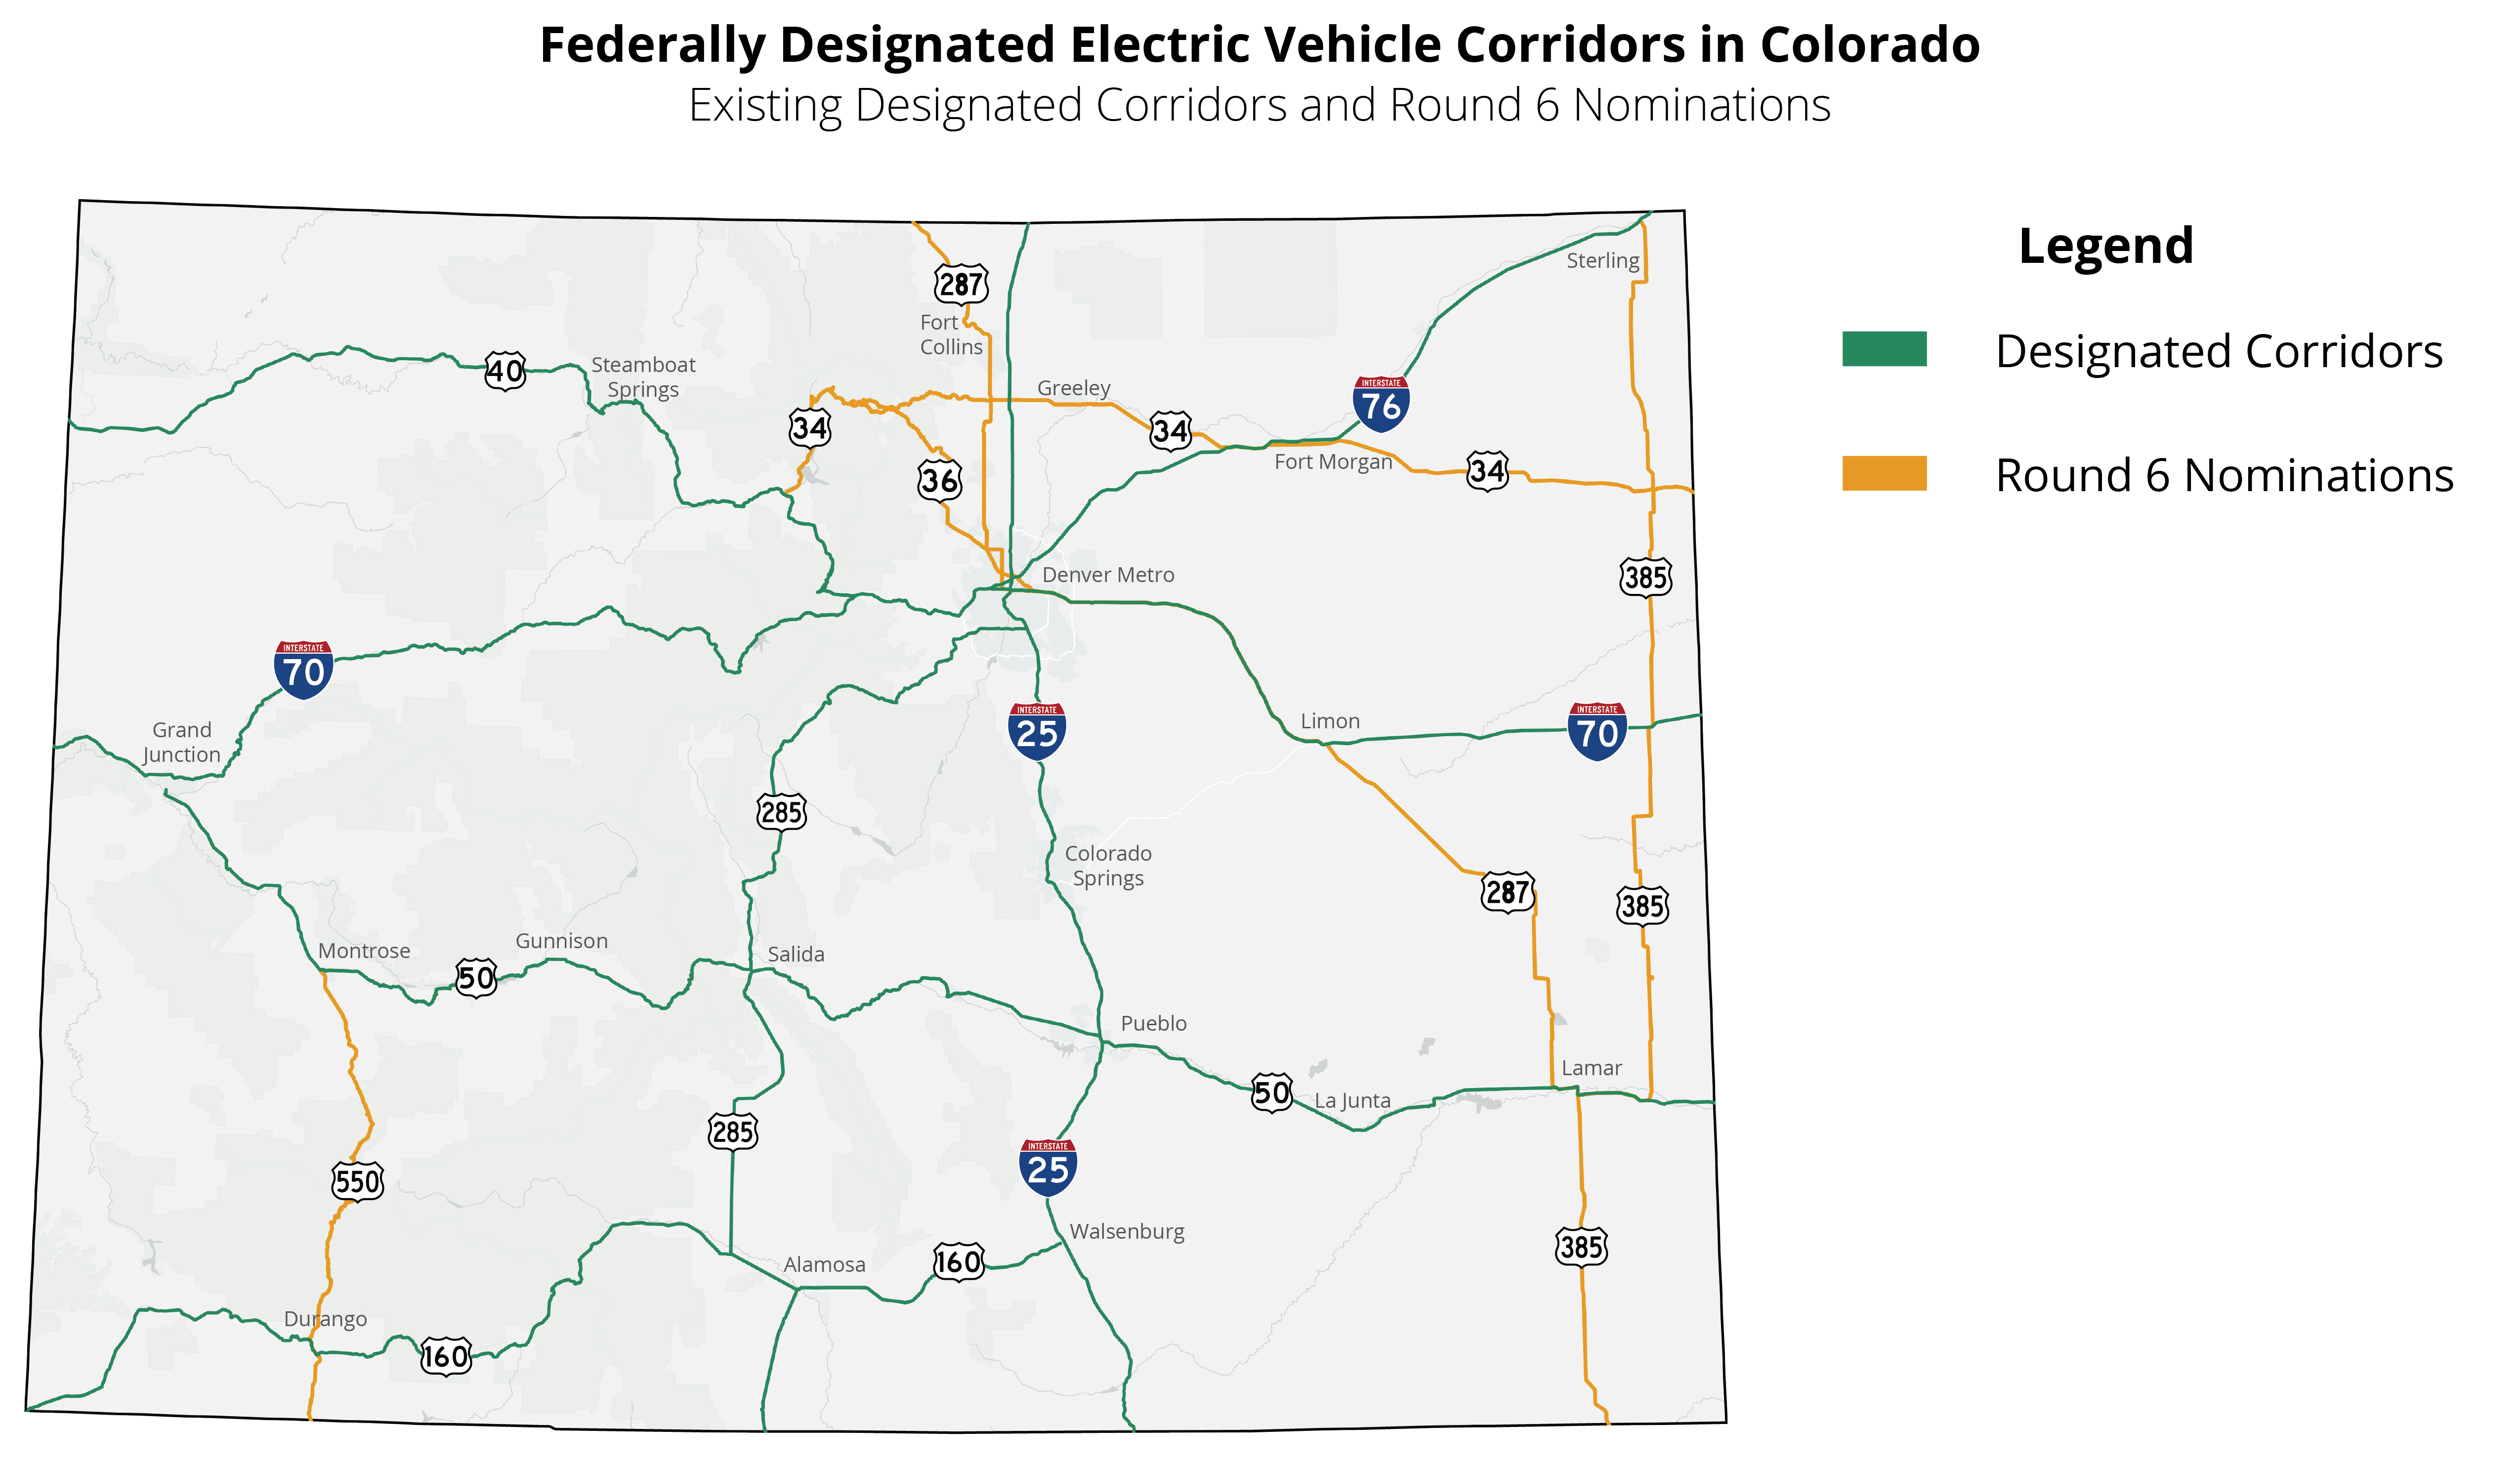 FHWA Electric Vehicle Corridor Designations & Nominations Round 6.png detail image